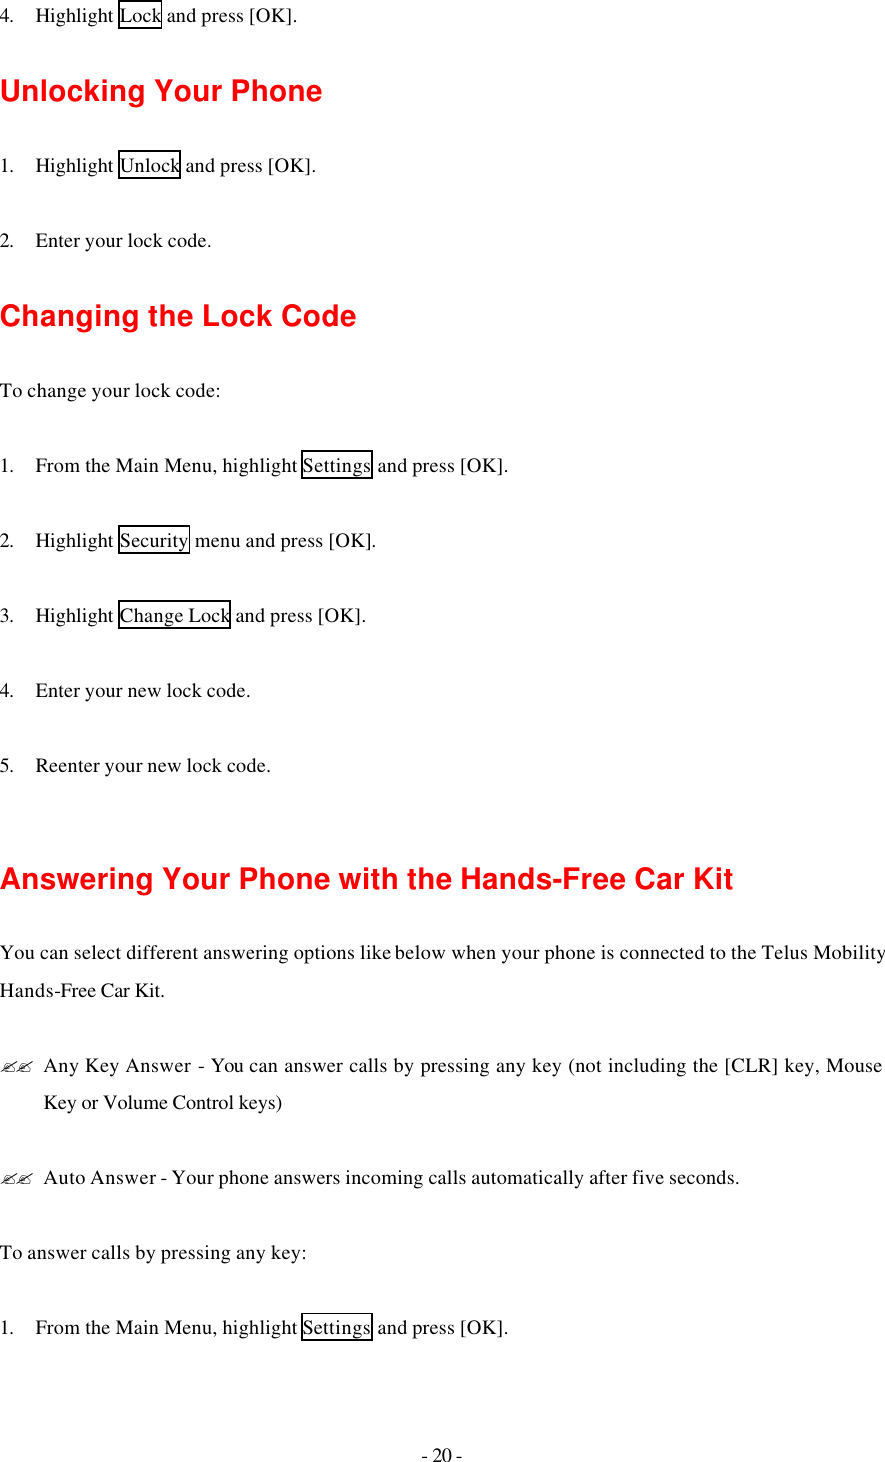 - 20 - 4. Highlight Lock and press [OK].  Unlocking Your Phone  1. Highlight Unlock and press [OK].  2. Enter your lock code.  Changing the Lock Code  To change your lock code:  1. From the Main Menu, highlight Settings and press [OK].  2. Highlight Security menu and press [OK].  3. Highlight Change Lock and press [OK].  4. Enter your new lock code.  5. Reenter your new lock code.   Answering Your Phone with the Hands-Free Car Kit  You can select different answering options like below when your phone is connected to the Telus Mobility Hands-Free Car Kit.  ?? Any Key Answer - You can answer calls by pressing any key (not including the [CLR] key, Mouse Key or Volume Control keys)  ?? Auto Answer - Your phone answers incoming calls automatically after five seconds.  To answer calls by pressing any key:  1. From the Main Menu, highlight Settings and press [OK]. 